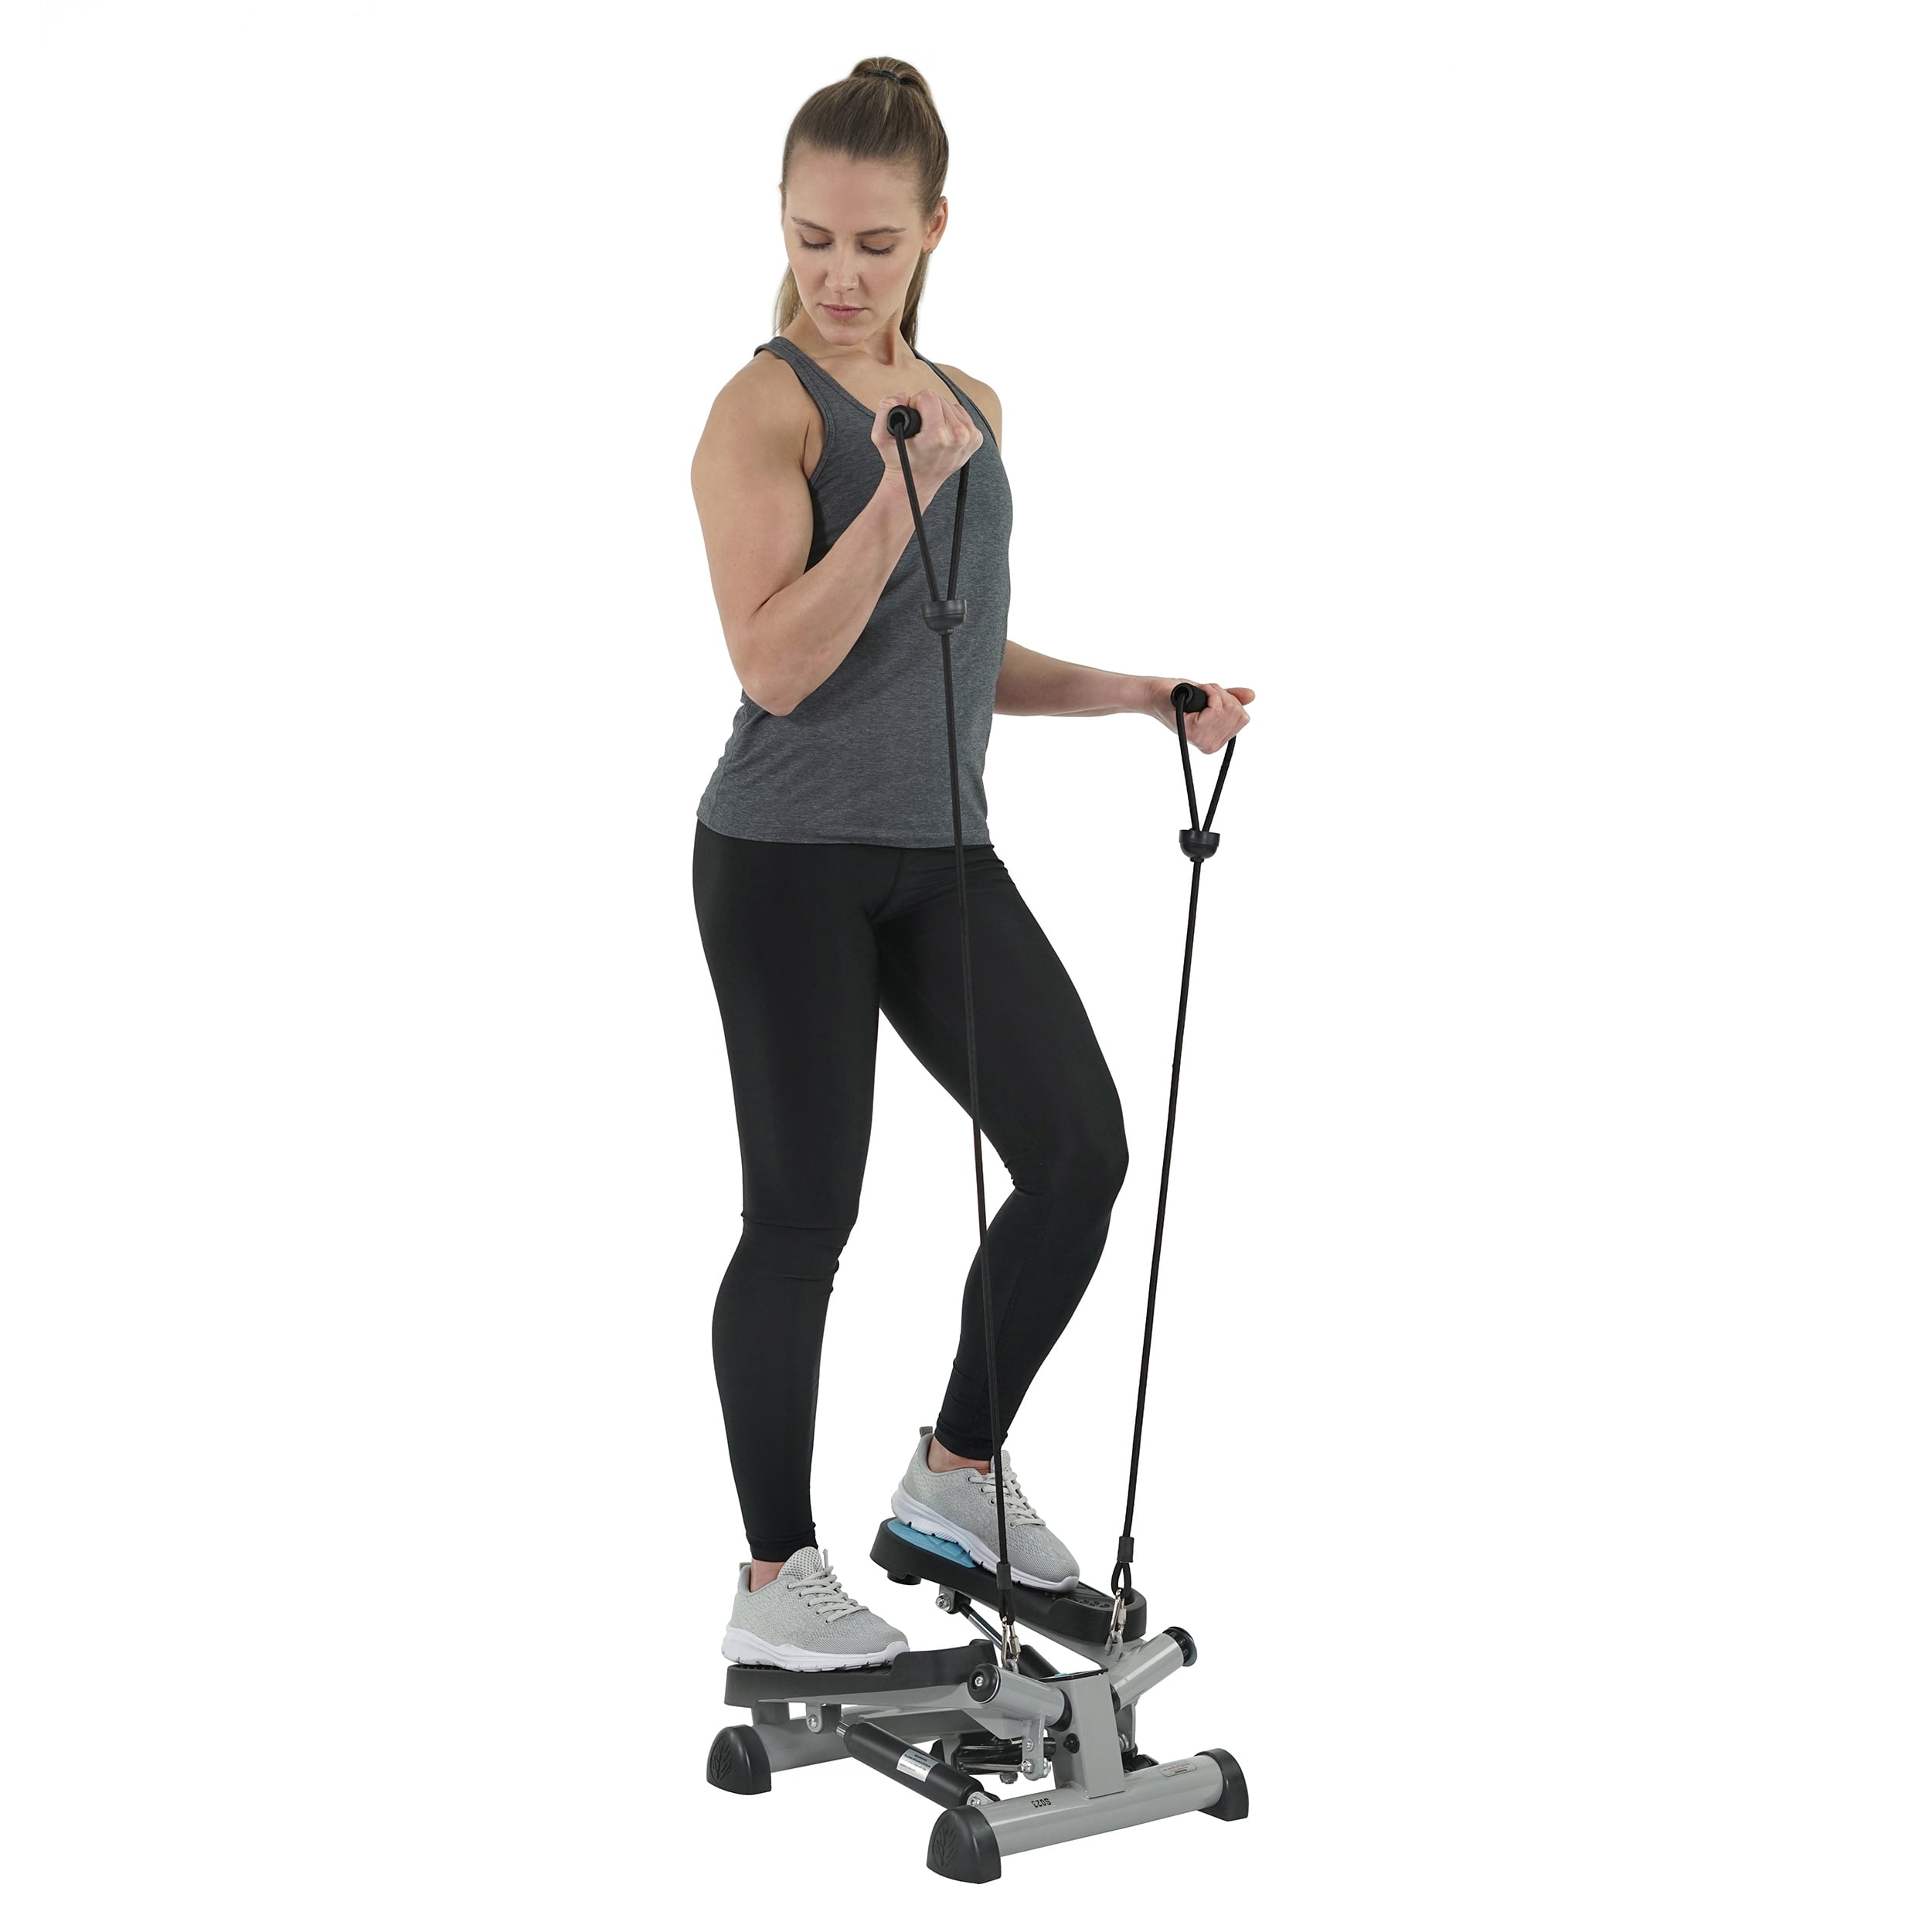 Grey Details about   Sunny Health & Fitness Versa Stepper Step Machine w/Wide Non-Slip,SF-S0870 